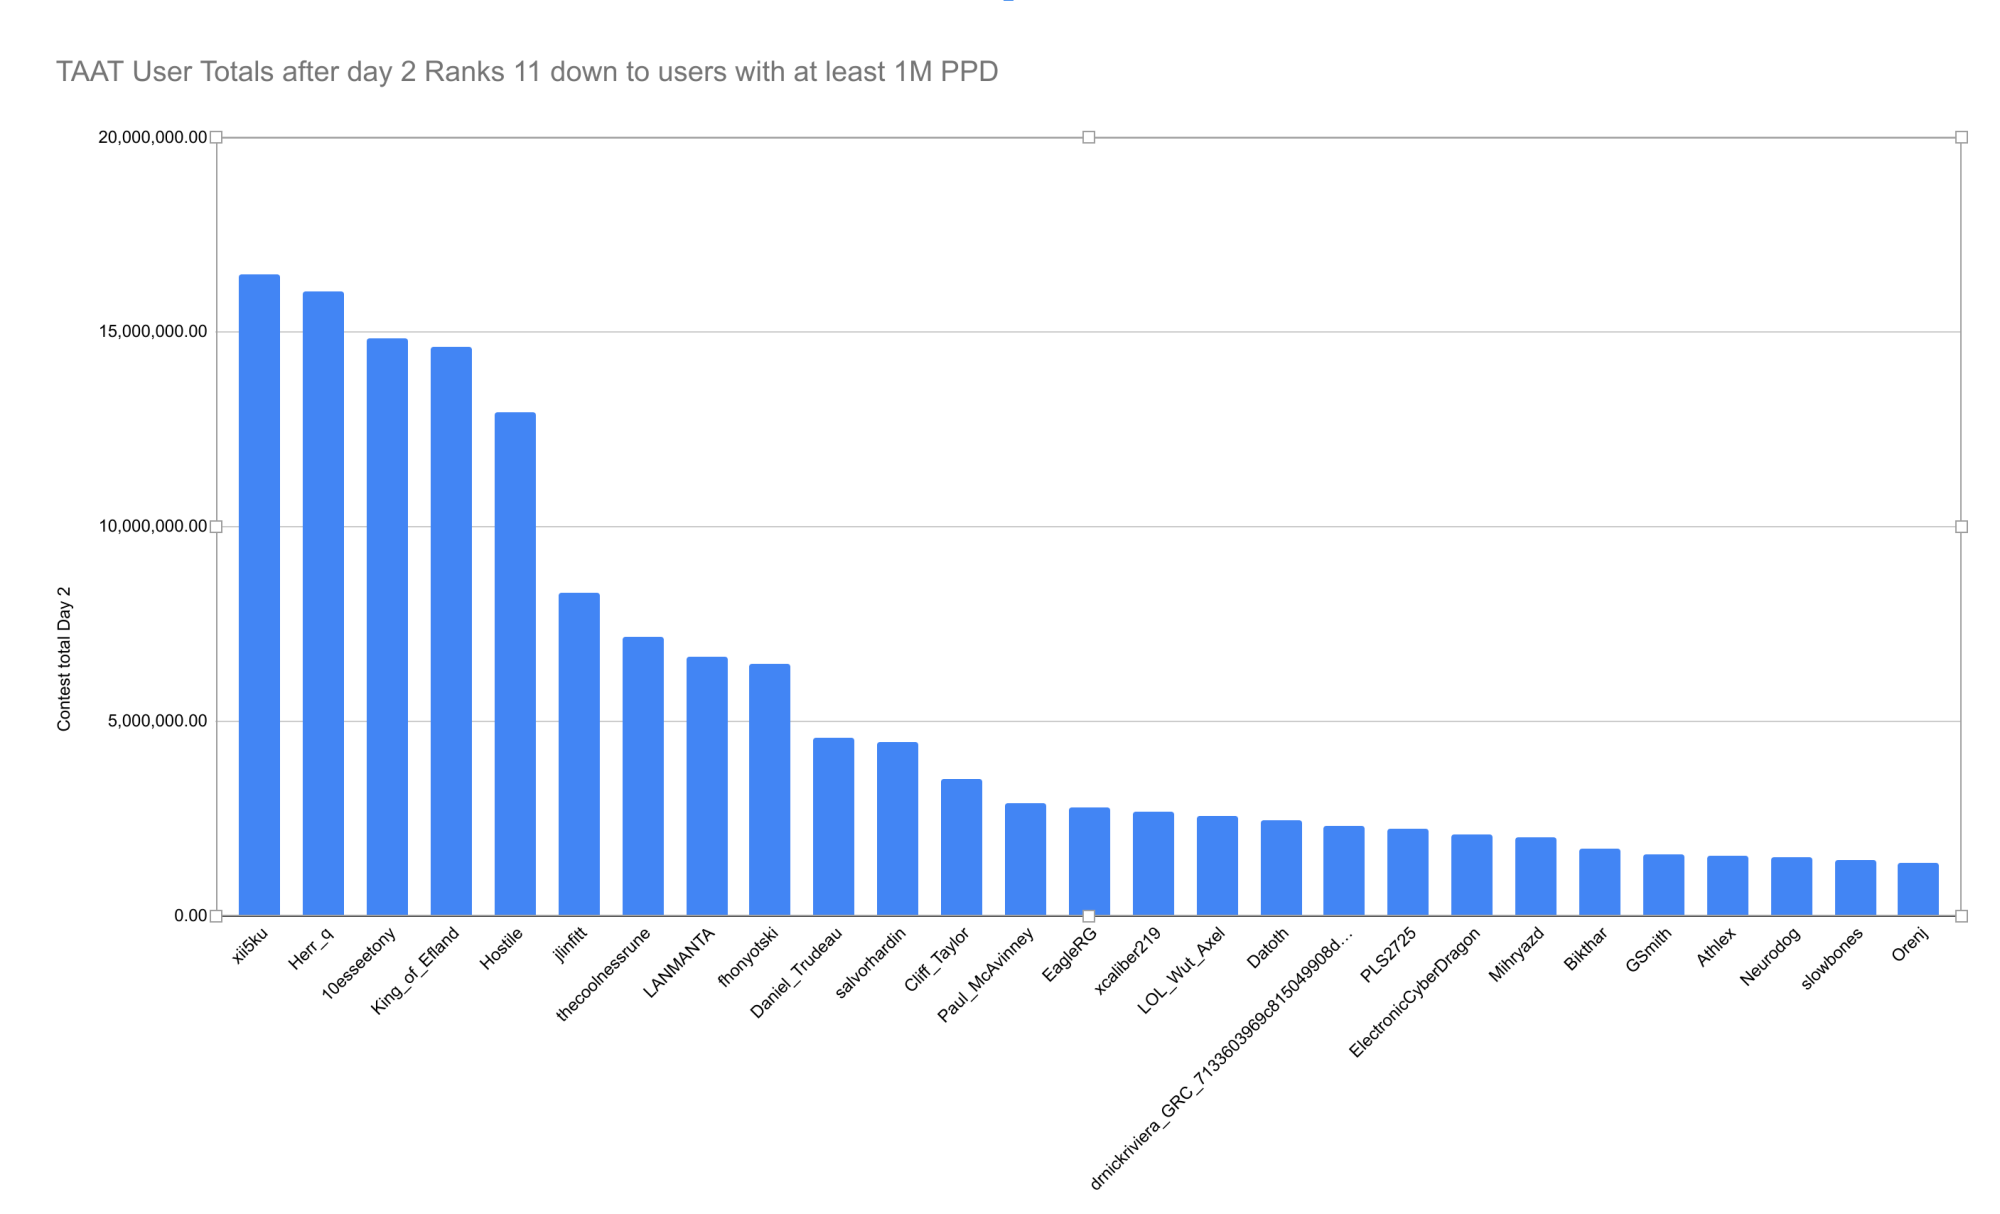 TAAT User totals day 2 11 - users 1M PPD.png